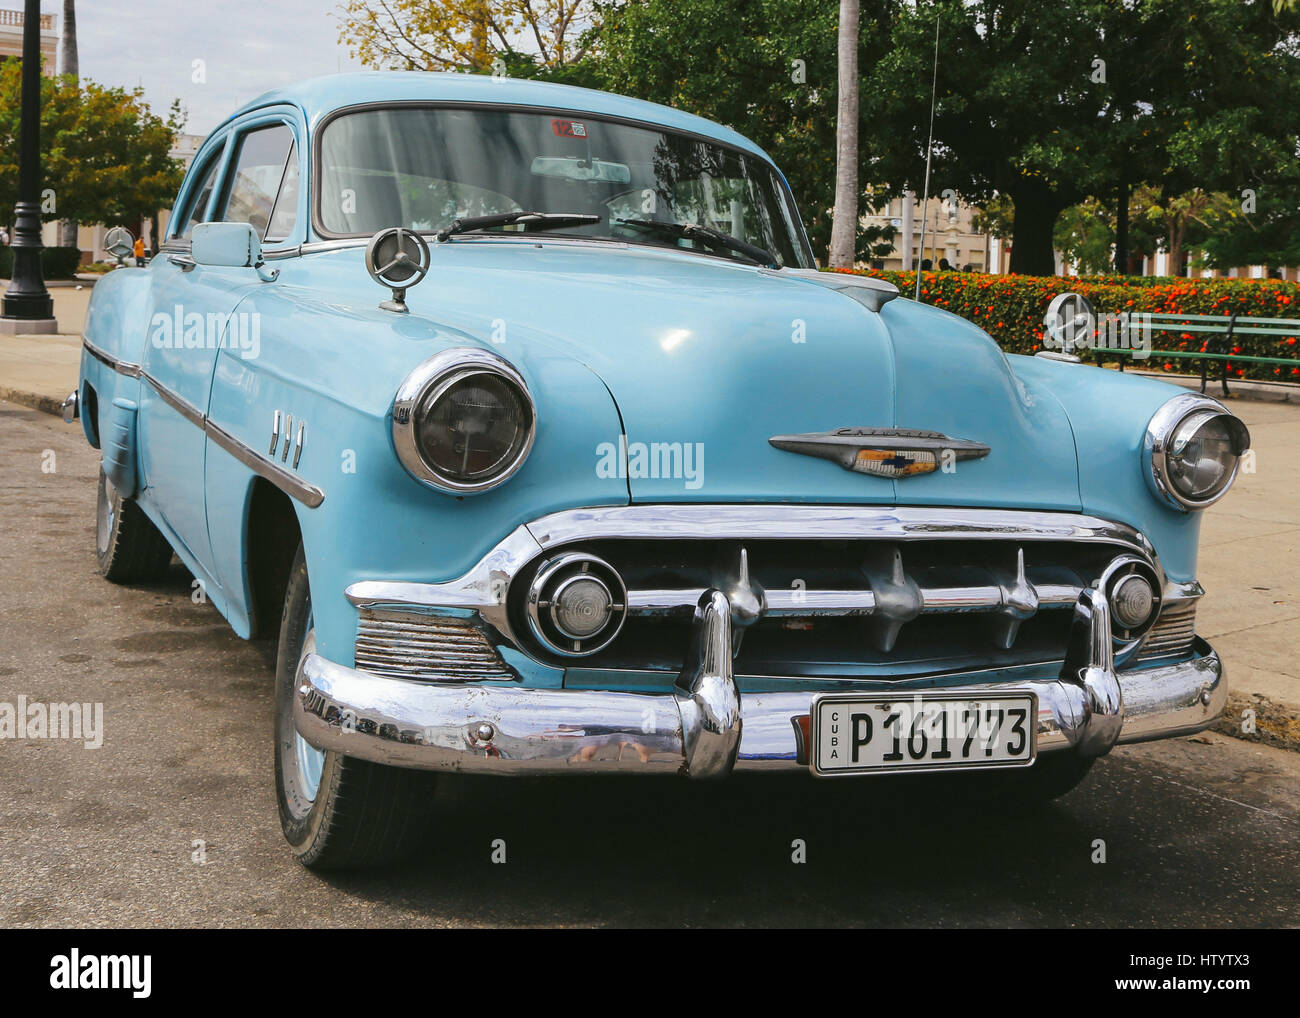 A classic blue Chevrolet car parked on the road in the town of Cienfuego, Cuba Stock Photo